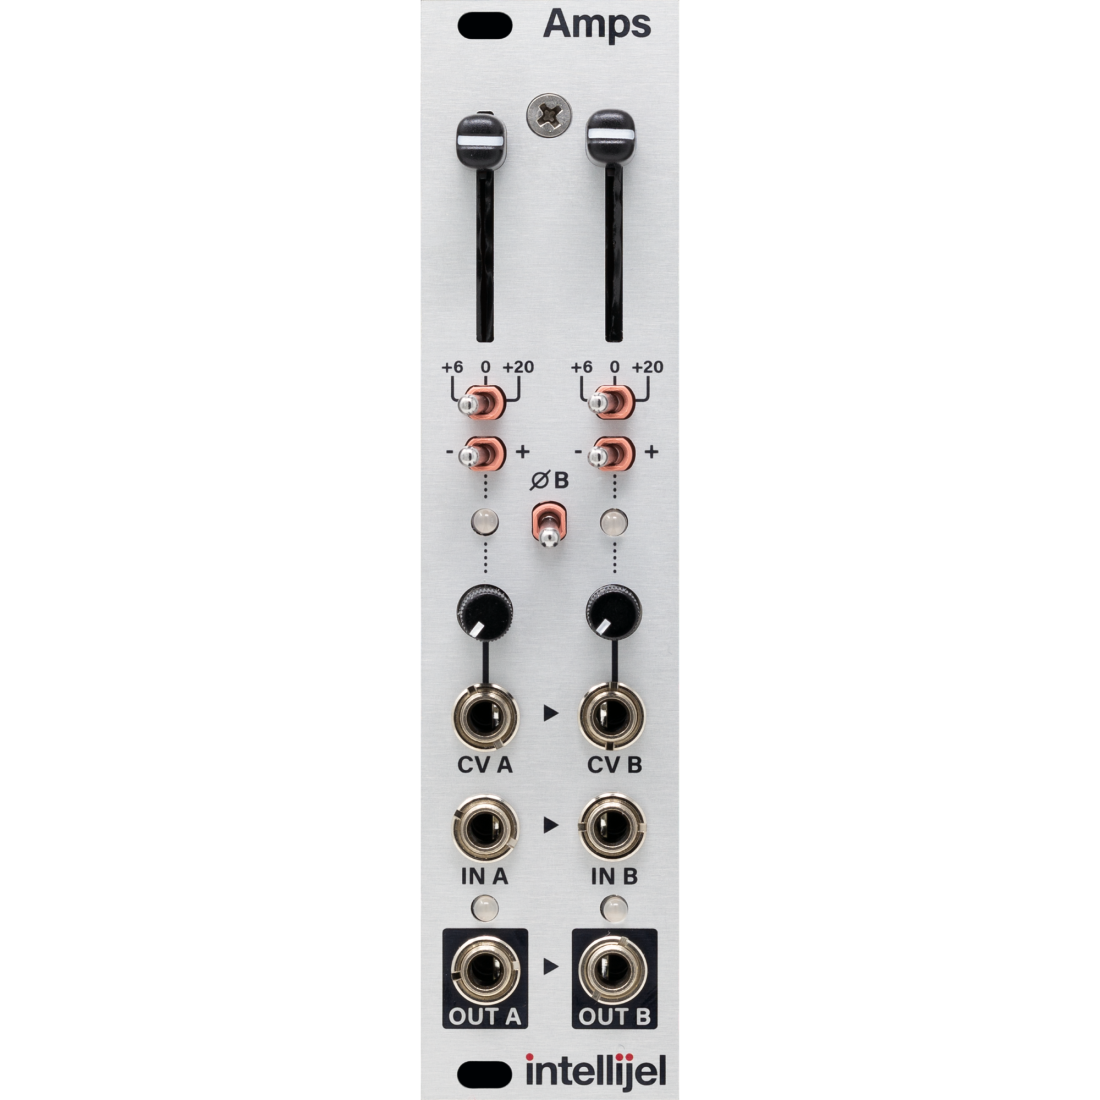 Amps - Precision Linear VCAs with Boost Switch